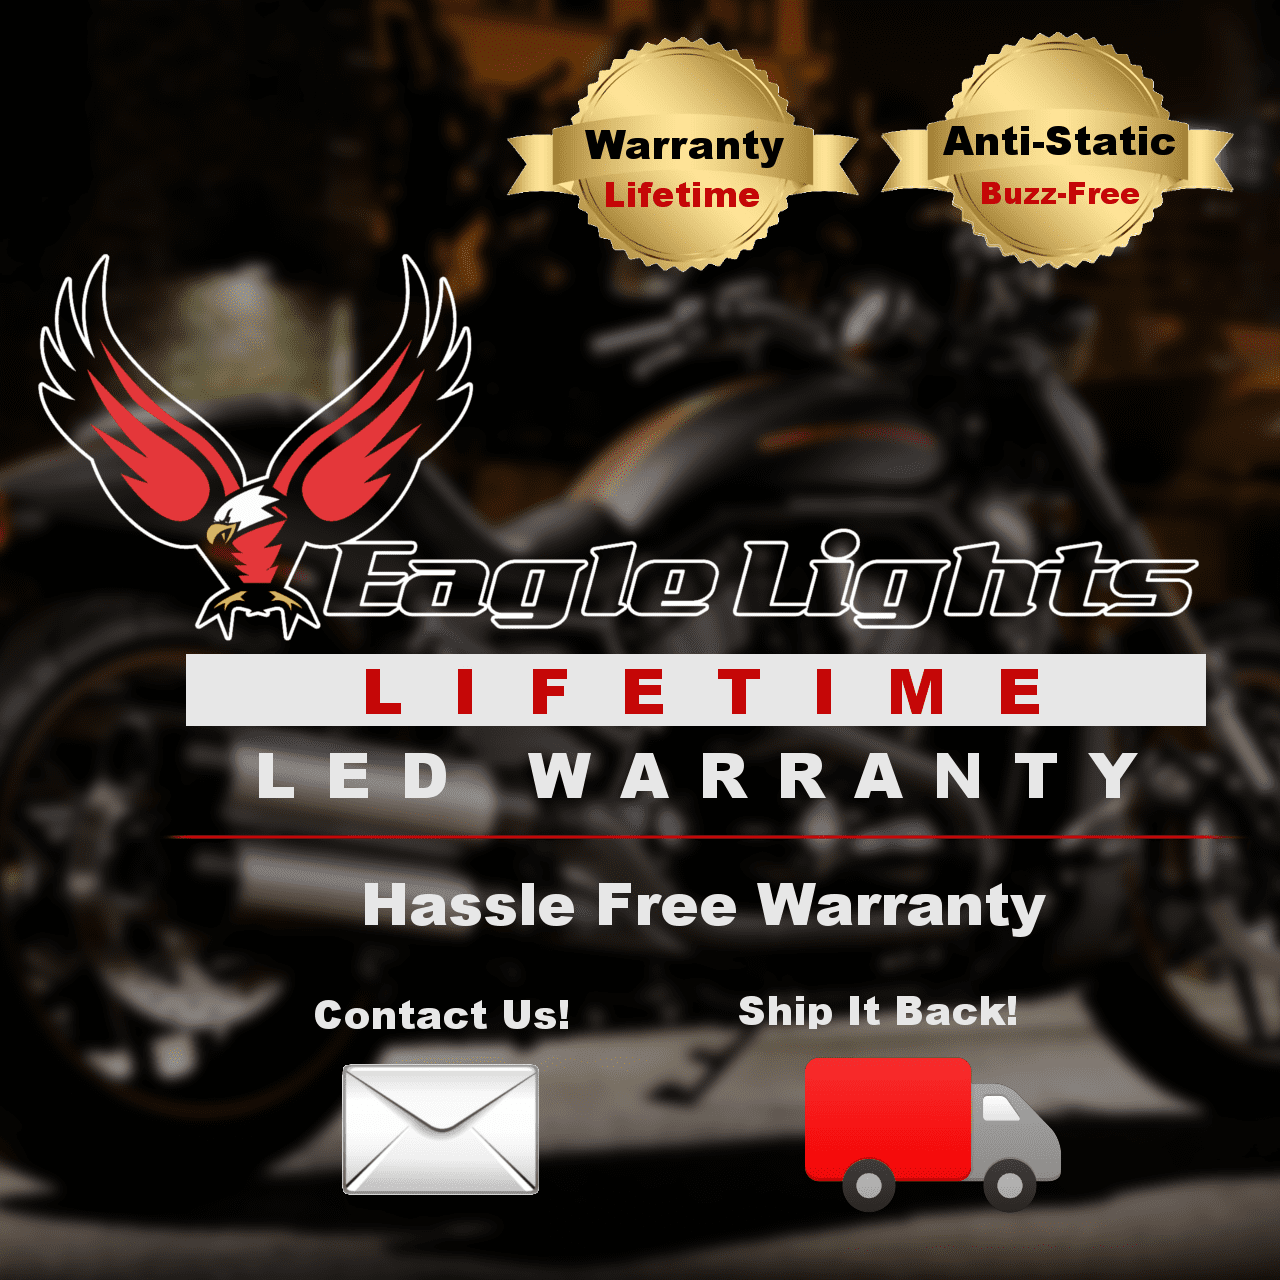 5 ¾” Halo & DRL LED Headlights - Eagle Lights 5 3/4" / 5.75" Slim Line Multi LED Projection Headlight - Black - Fits All 5 3/4" Harley Davdison And Indian Headlight Buckets